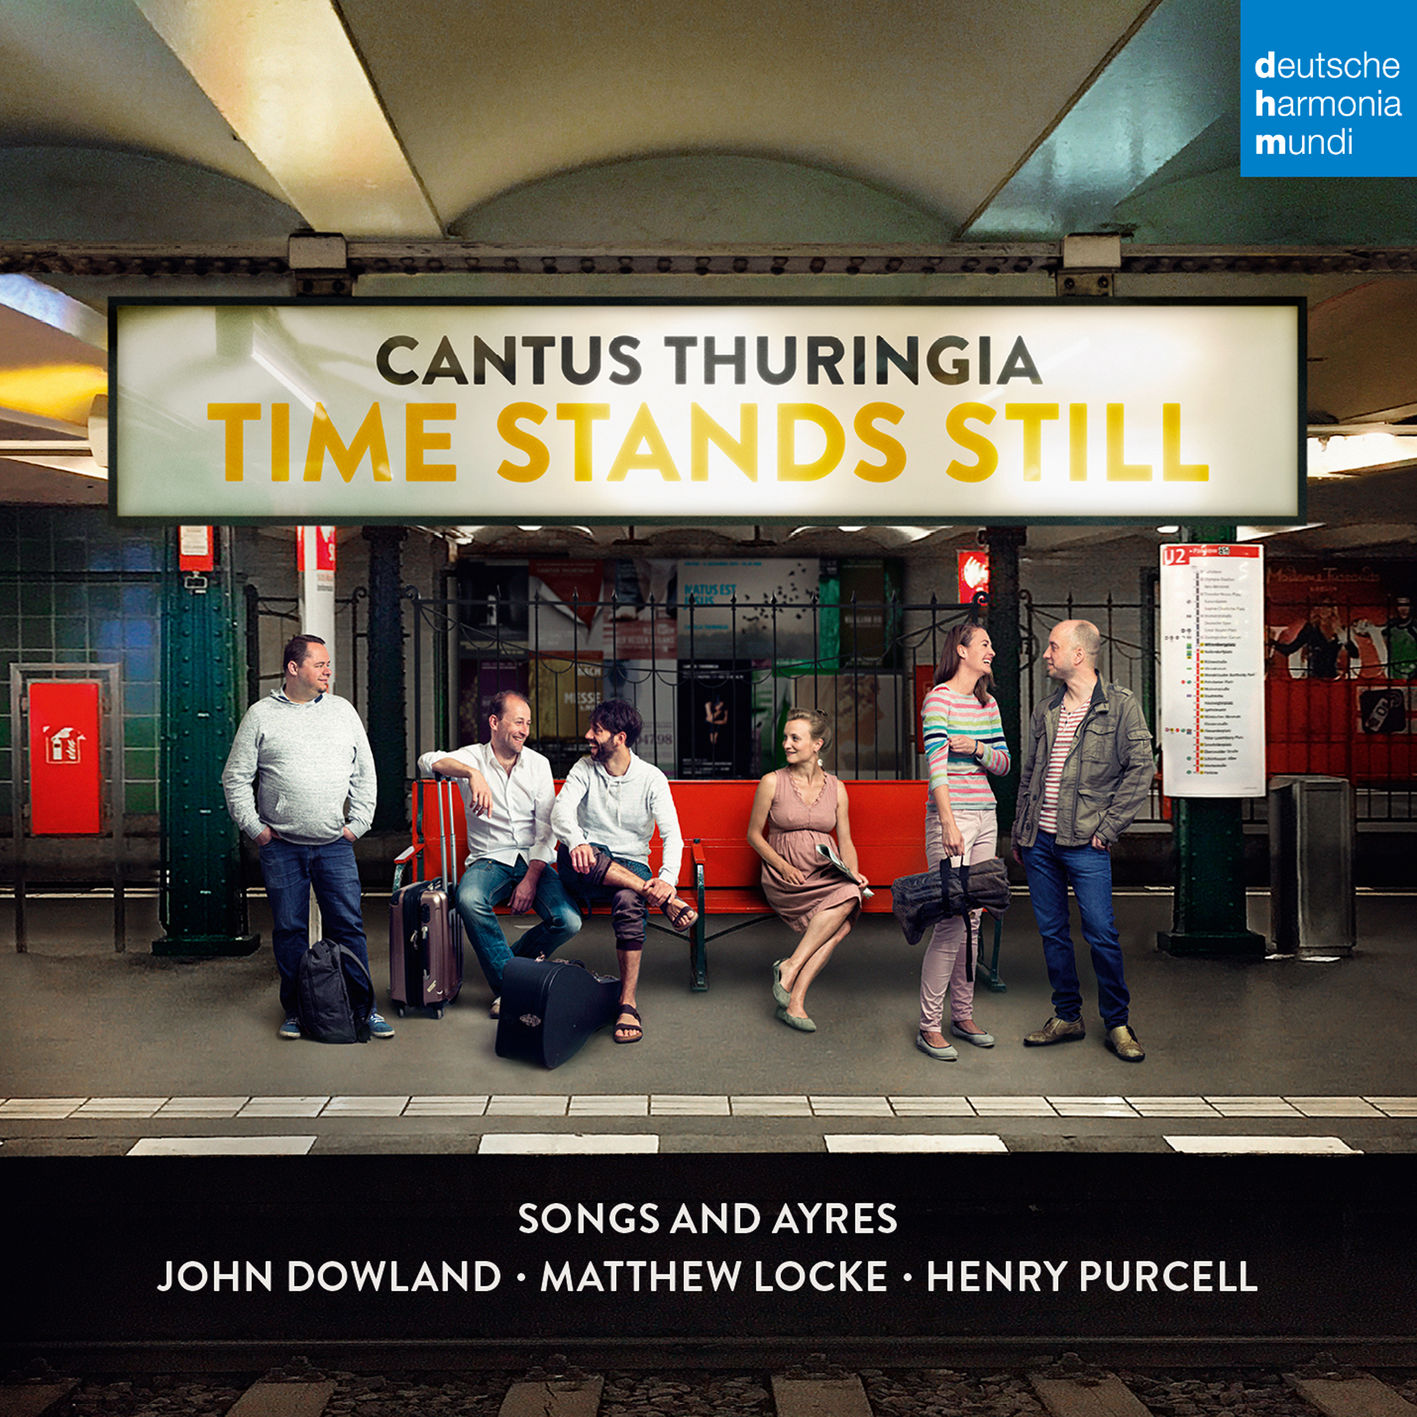 Cantus Thuringia – Time Stands Still (2018) [FLAC 24bit/96kHz]